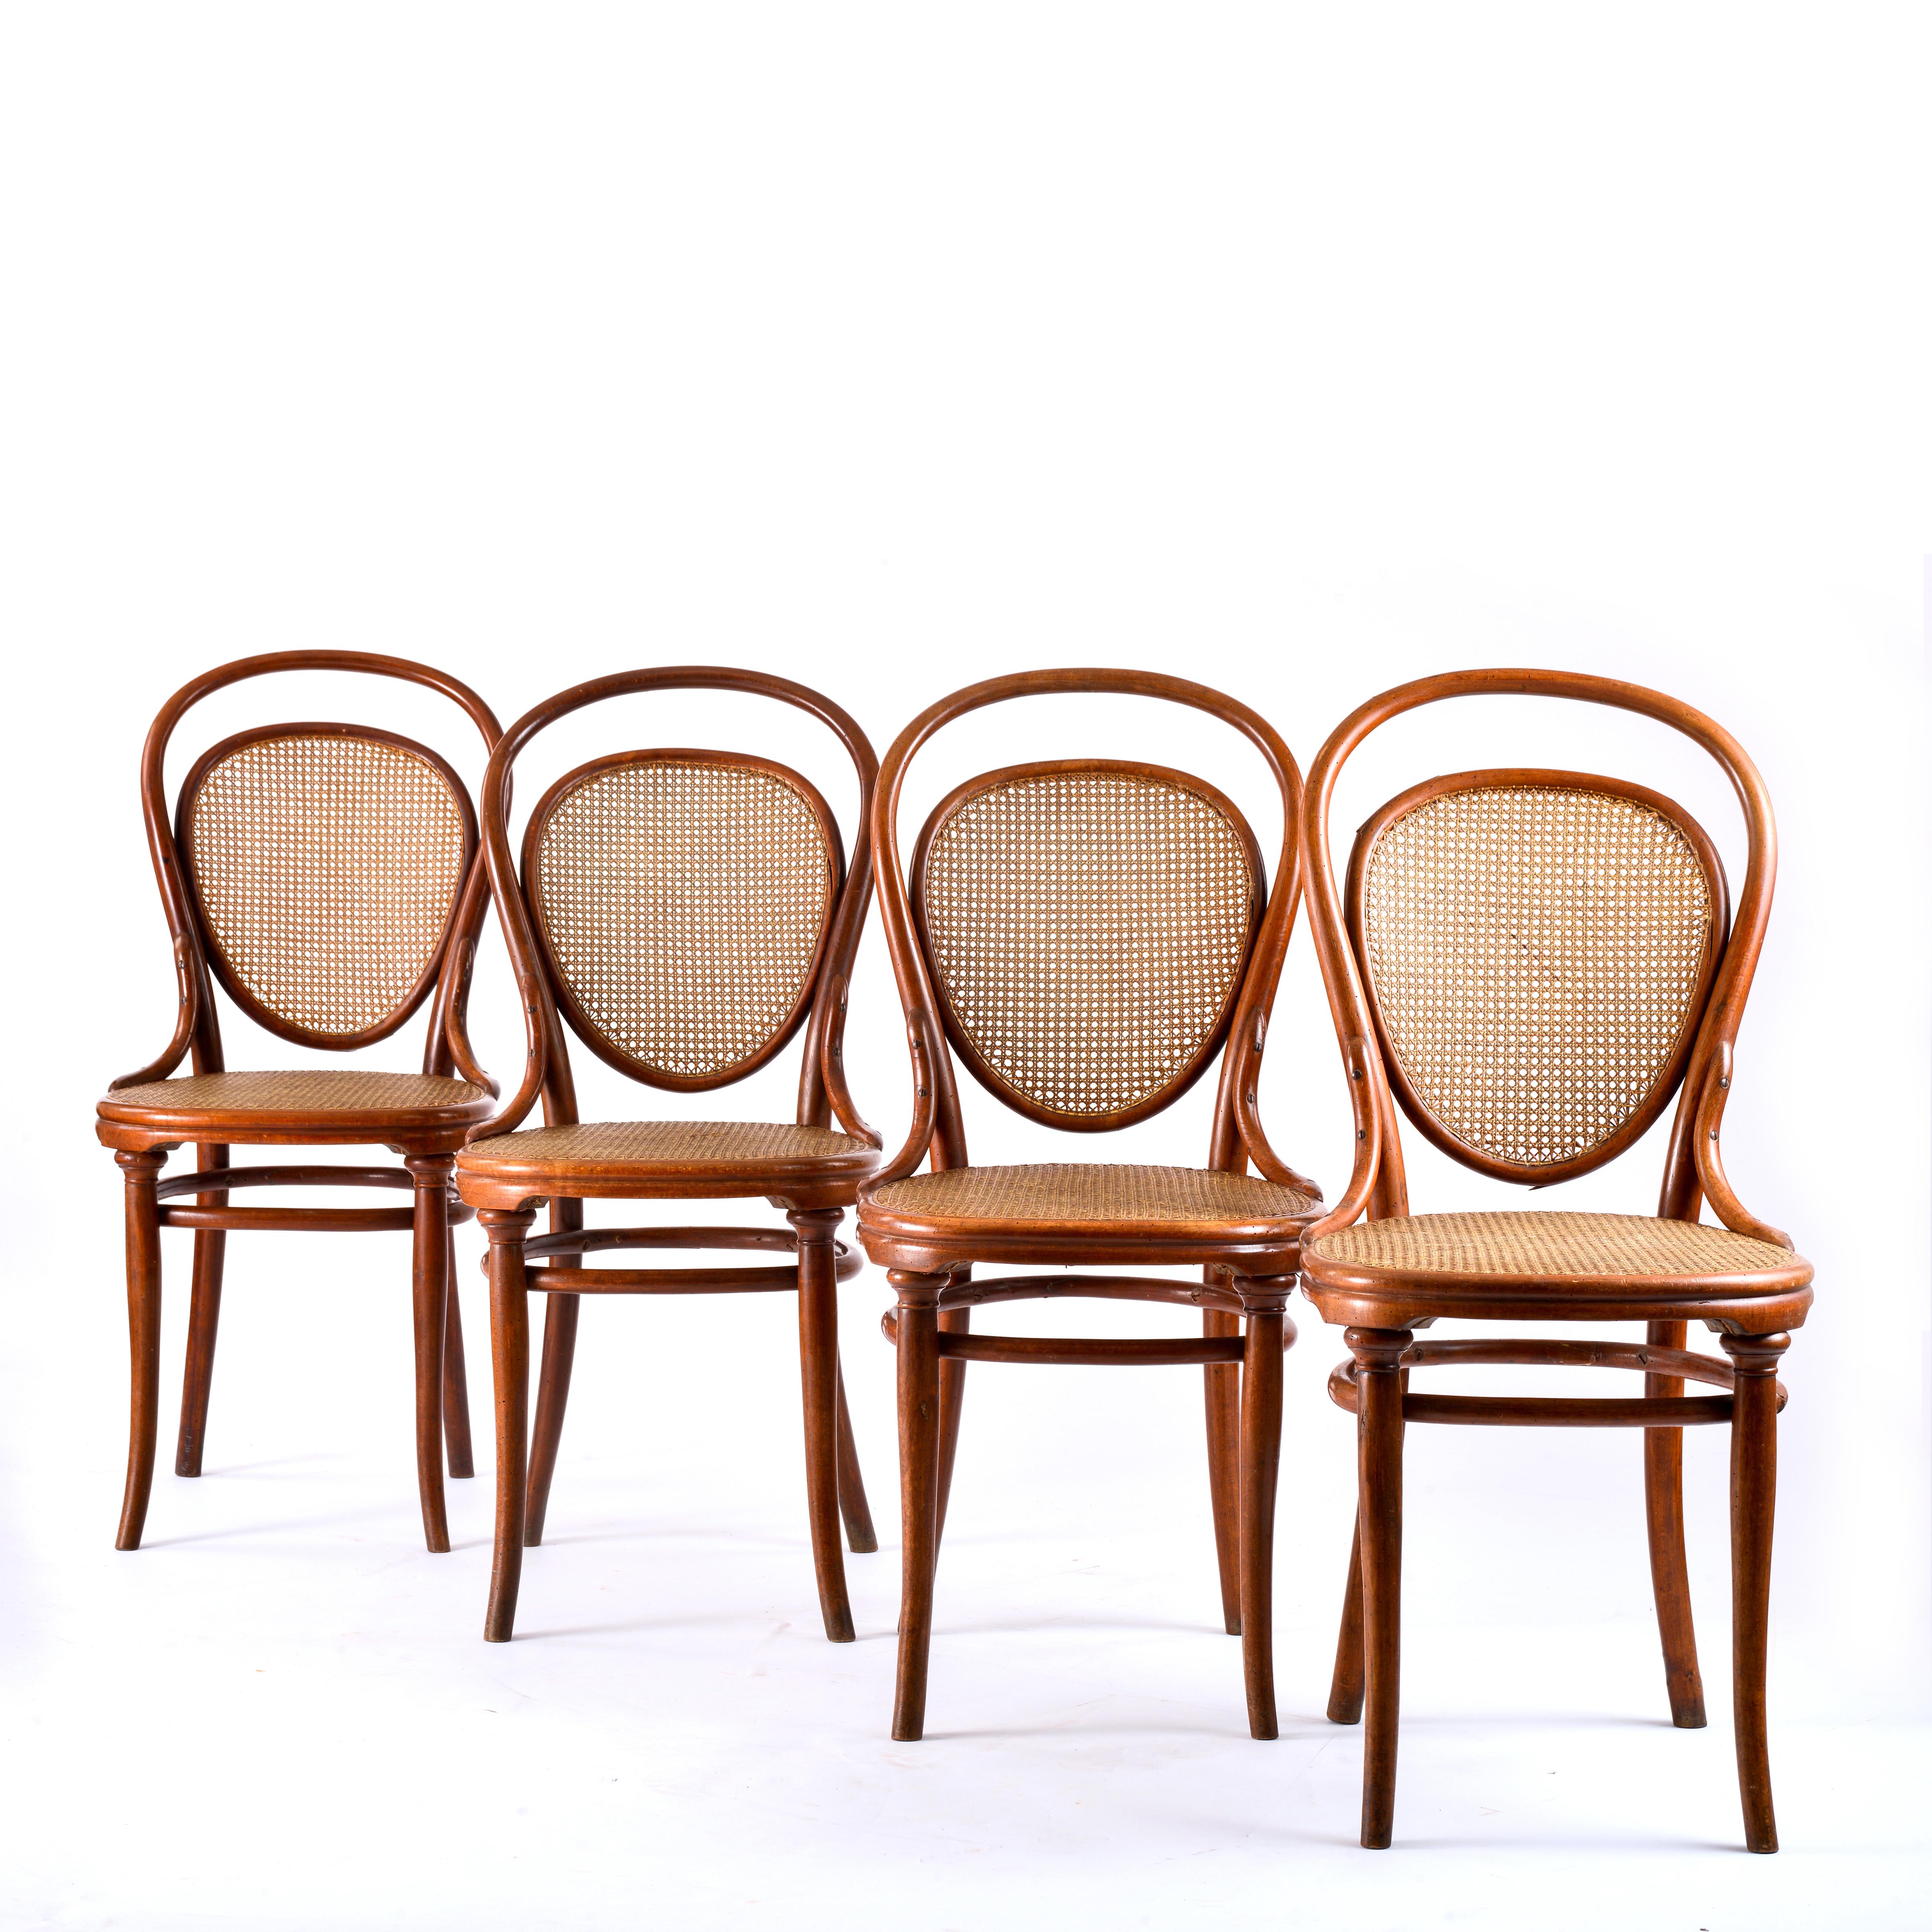 Napoleon III 4 bentwood chairs, number 7, published by Thonet at the end of the 19th century.